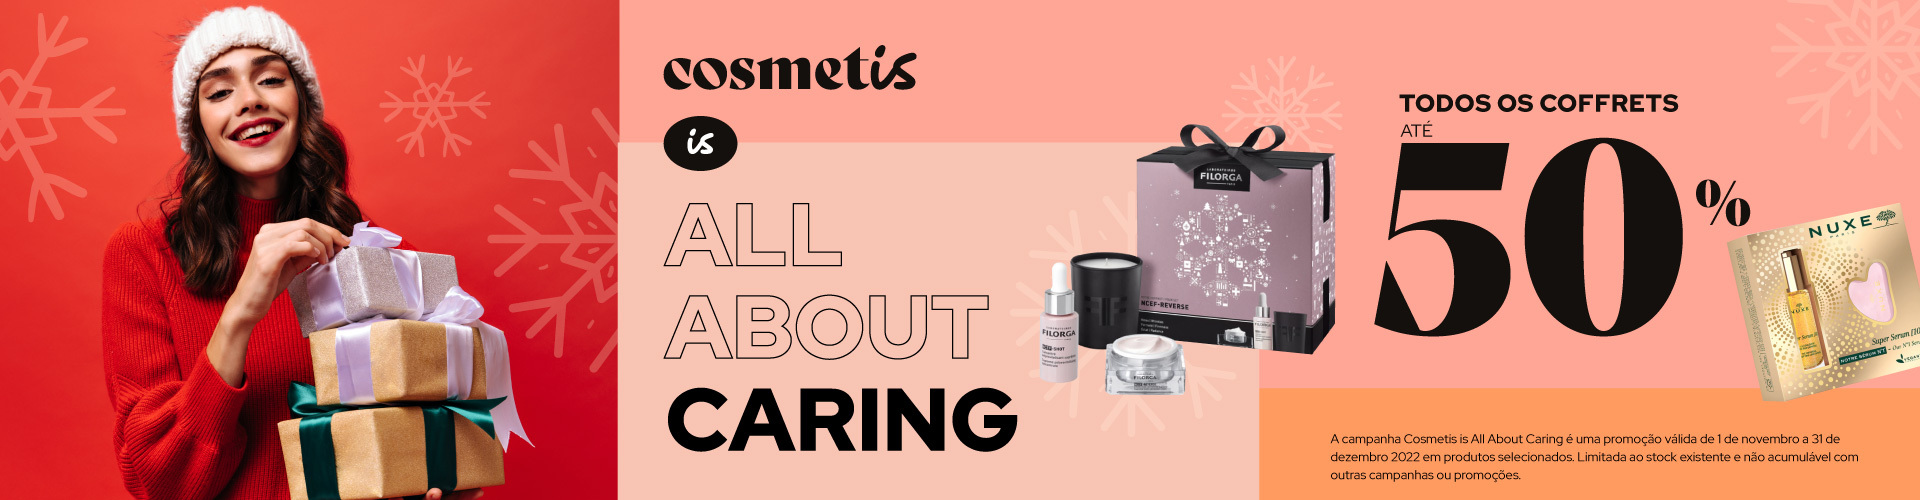 Cosmetis is All About Caring